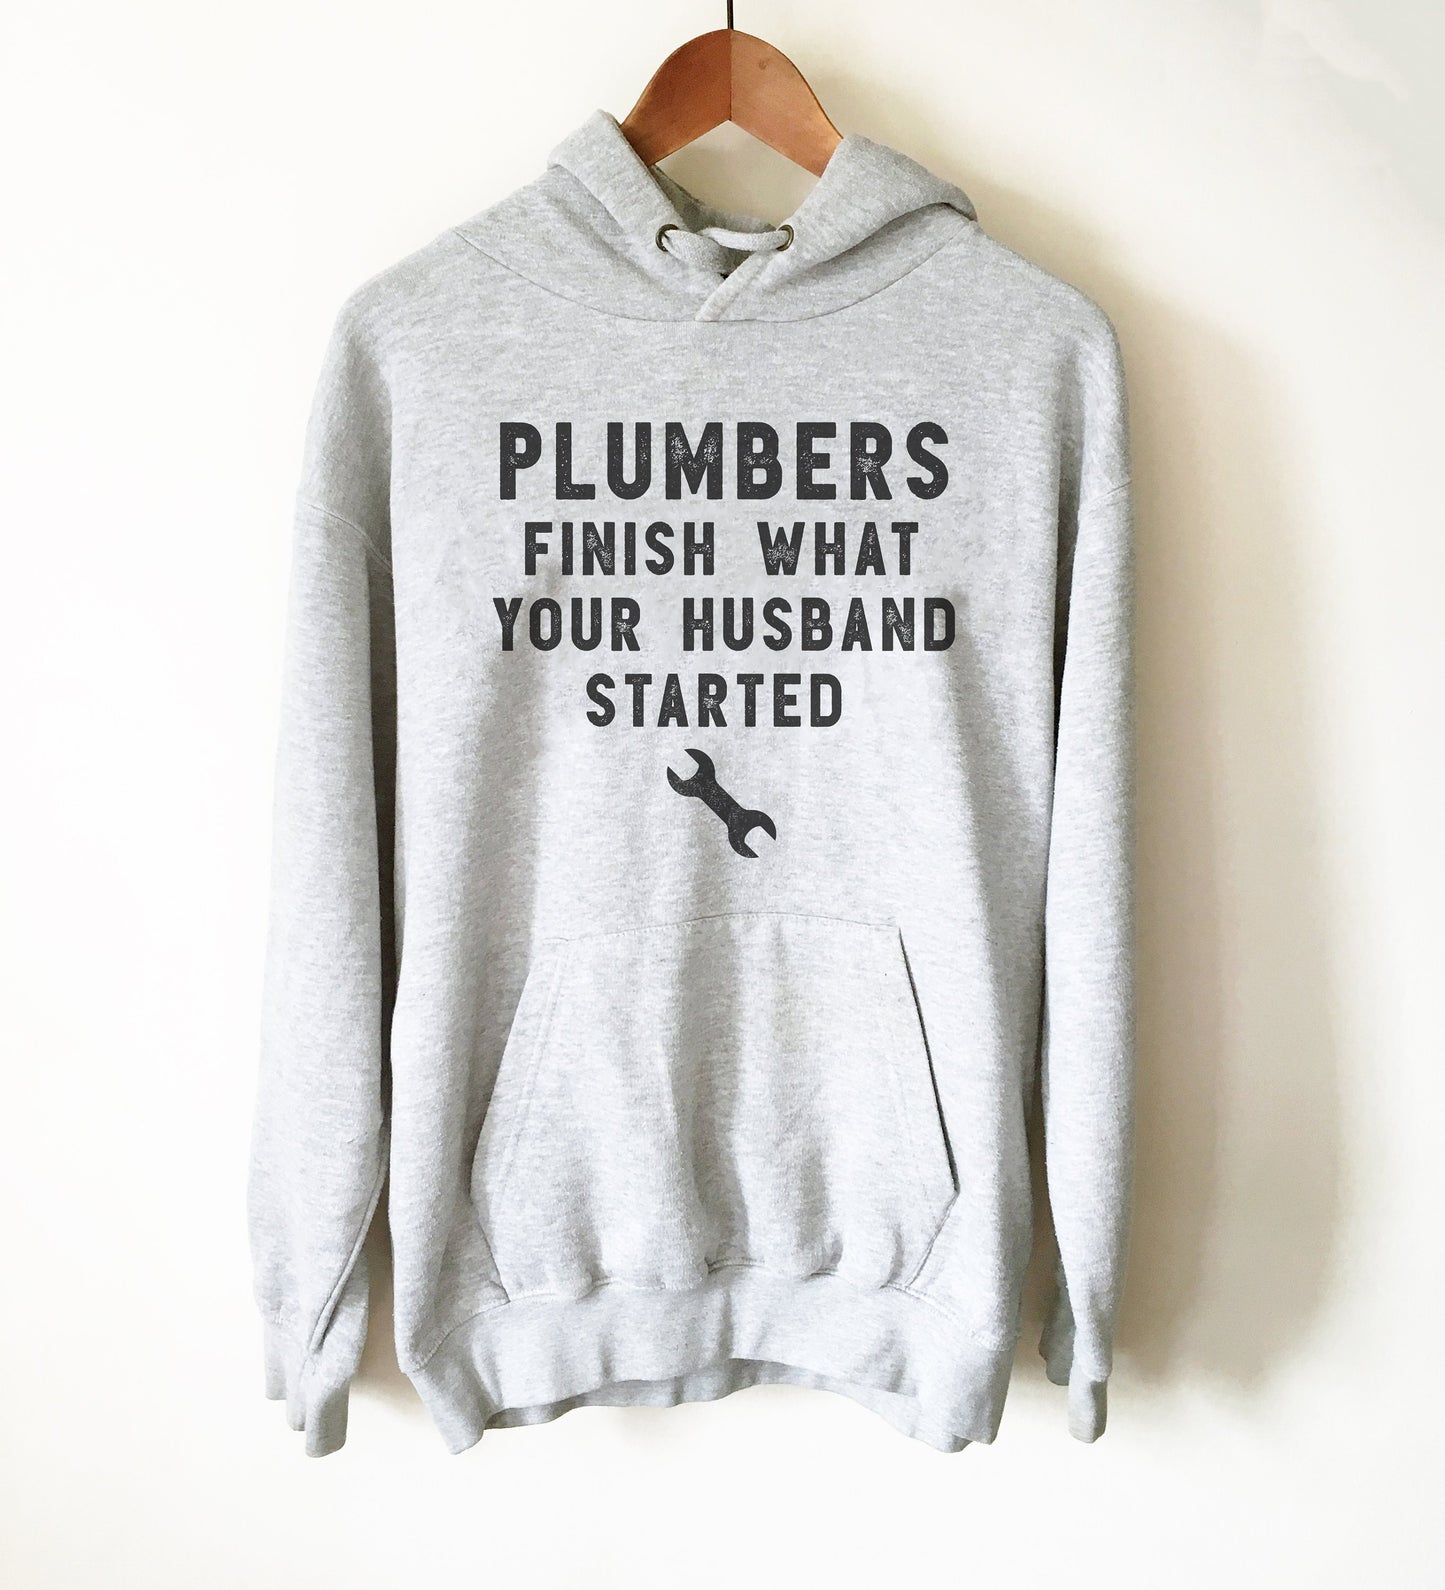 Plumbers Finish What Your Husband Started Hoodie - Plumber, Plumber T-Shirt, Plumbing Shirt, Plumber Gift, Fathers Day Gift, Gift For Dad